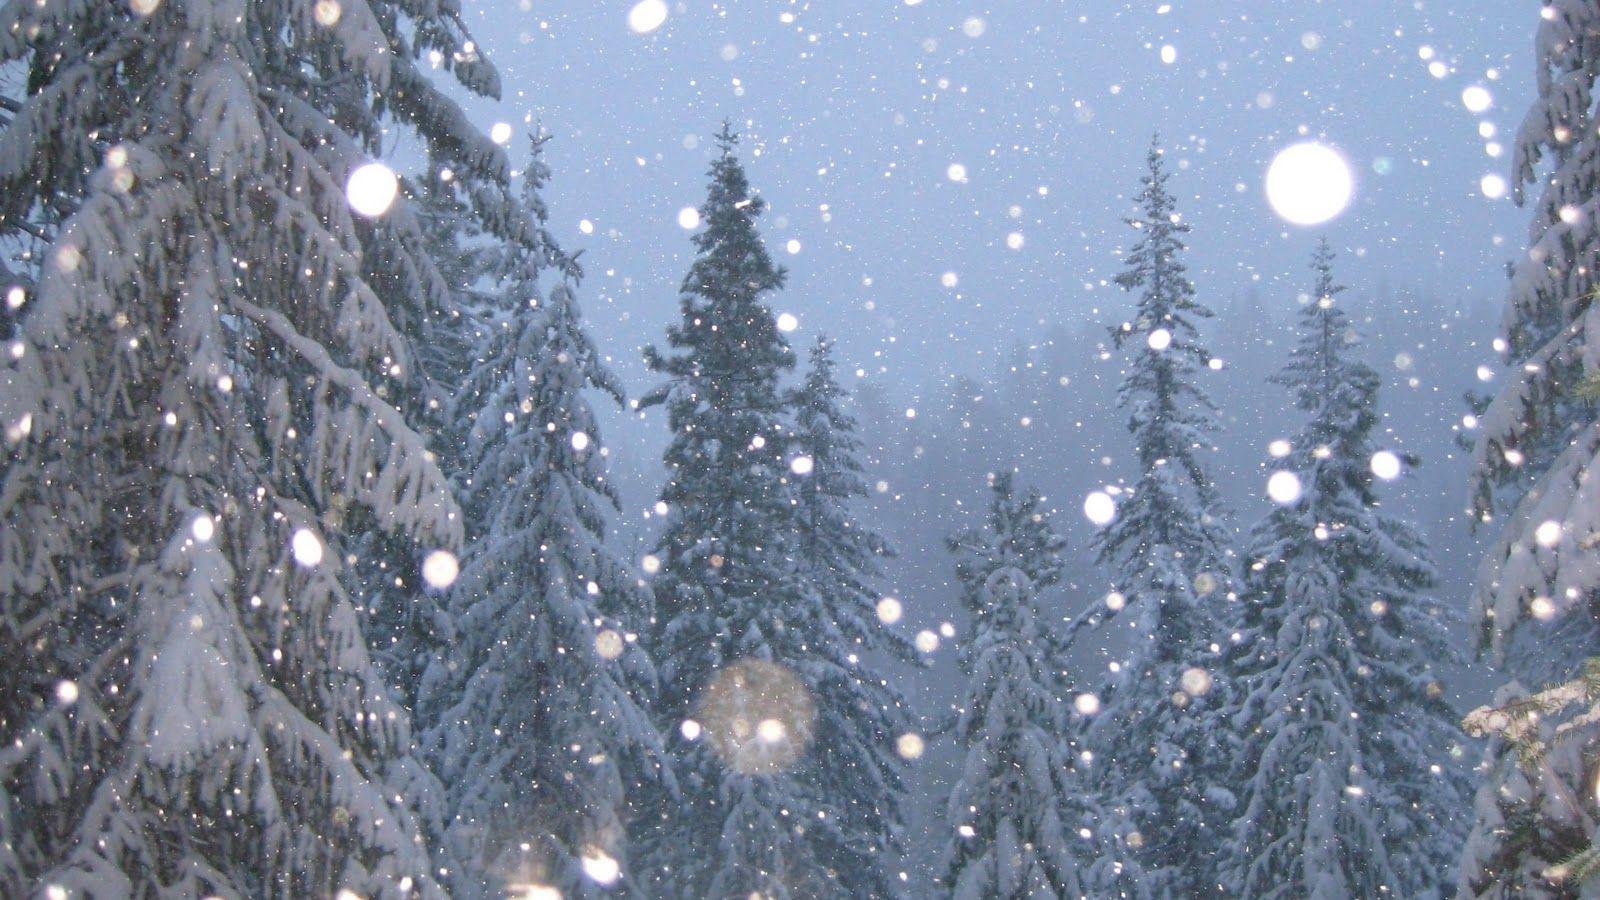 Snow Falling Background Wallpaper